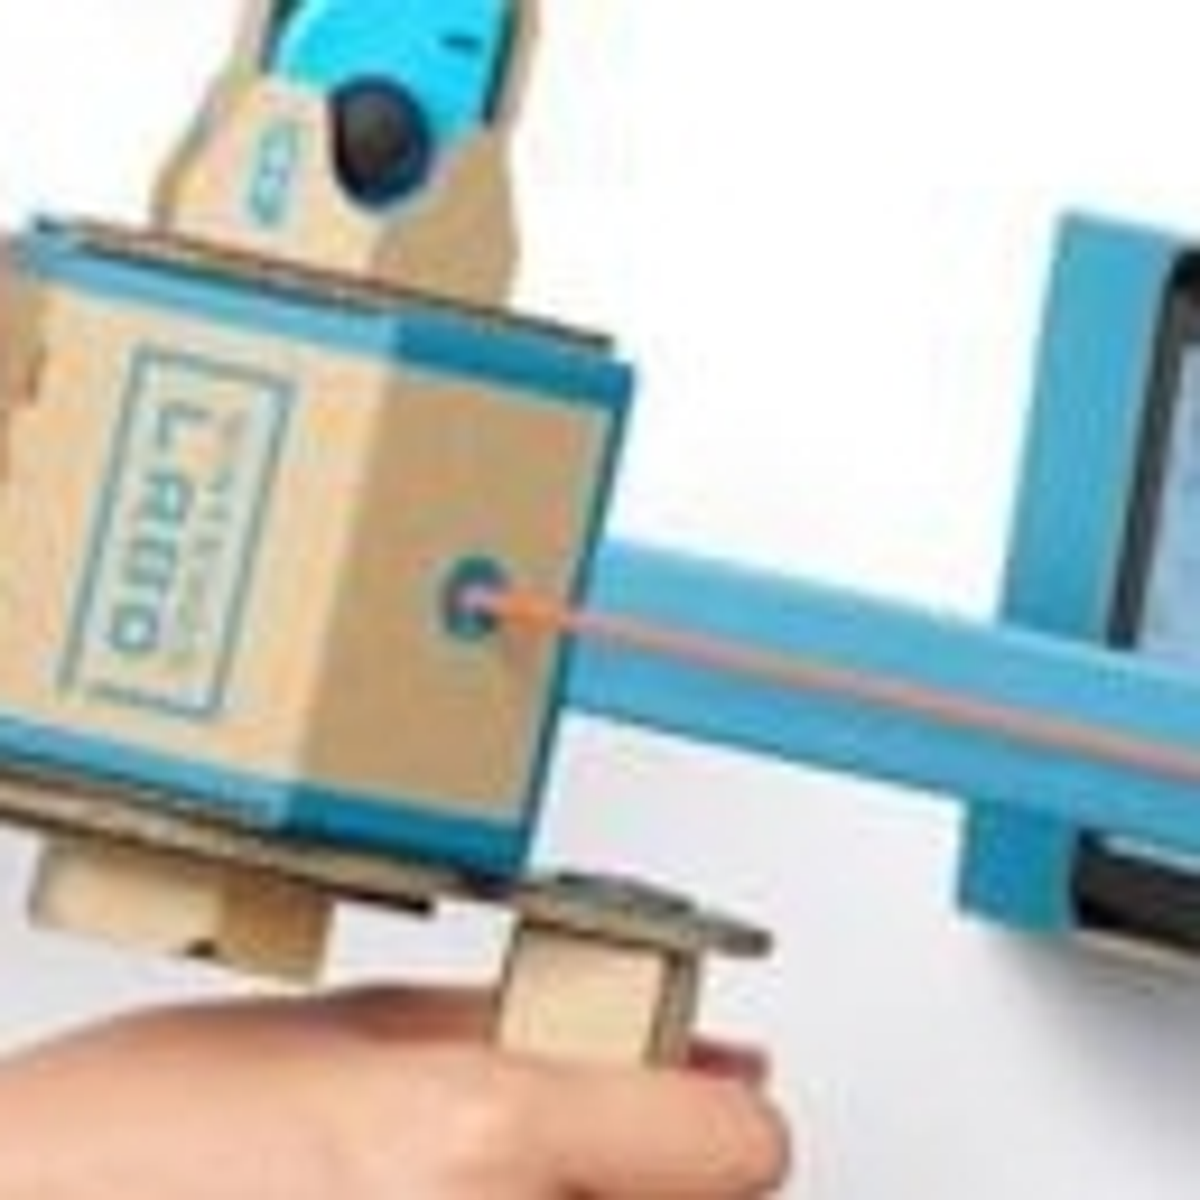 Nintendo shows off Labo's Garage mode, a programming toolkit for